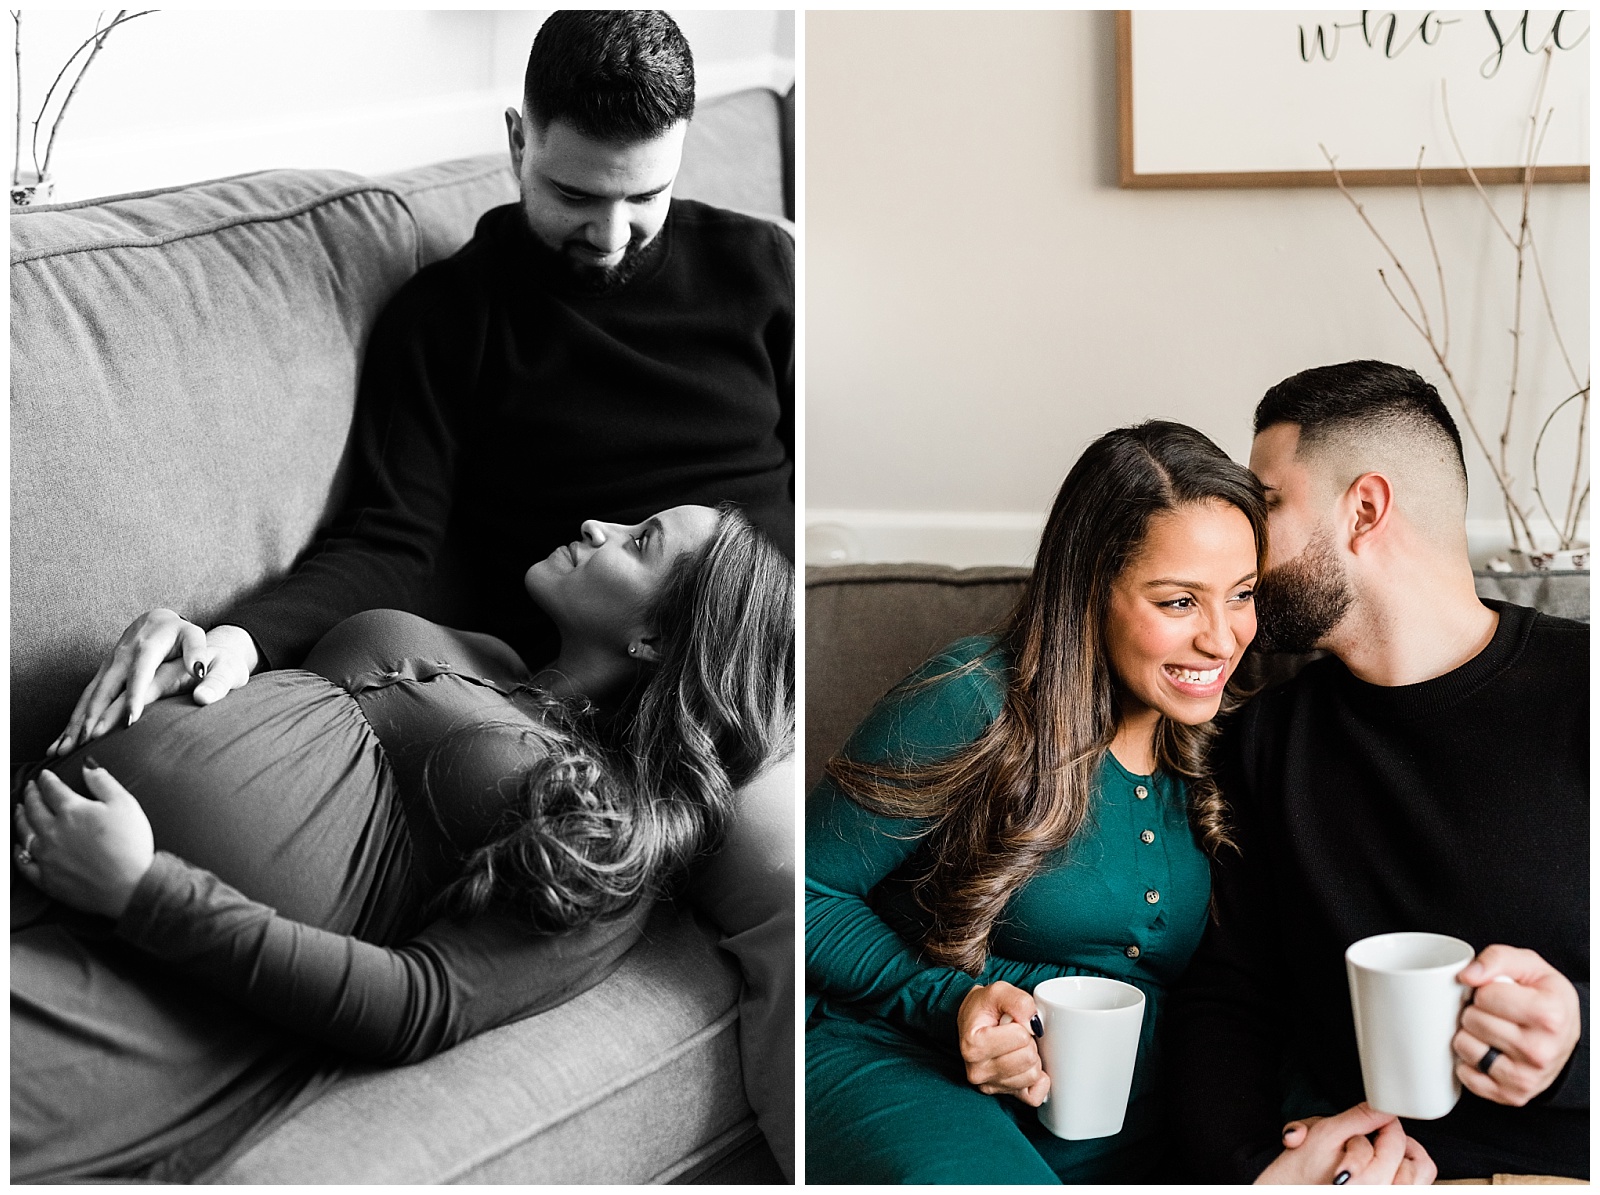 In Home Maternity Session, Family, Nursery, Baby, New Parents, Maternity Shoot, Pregnant, Pregnancy Photos, New Jersey, Photographer, Baby Boy, Couch, Living Room, Home, Cozy, Snuggle, Photo